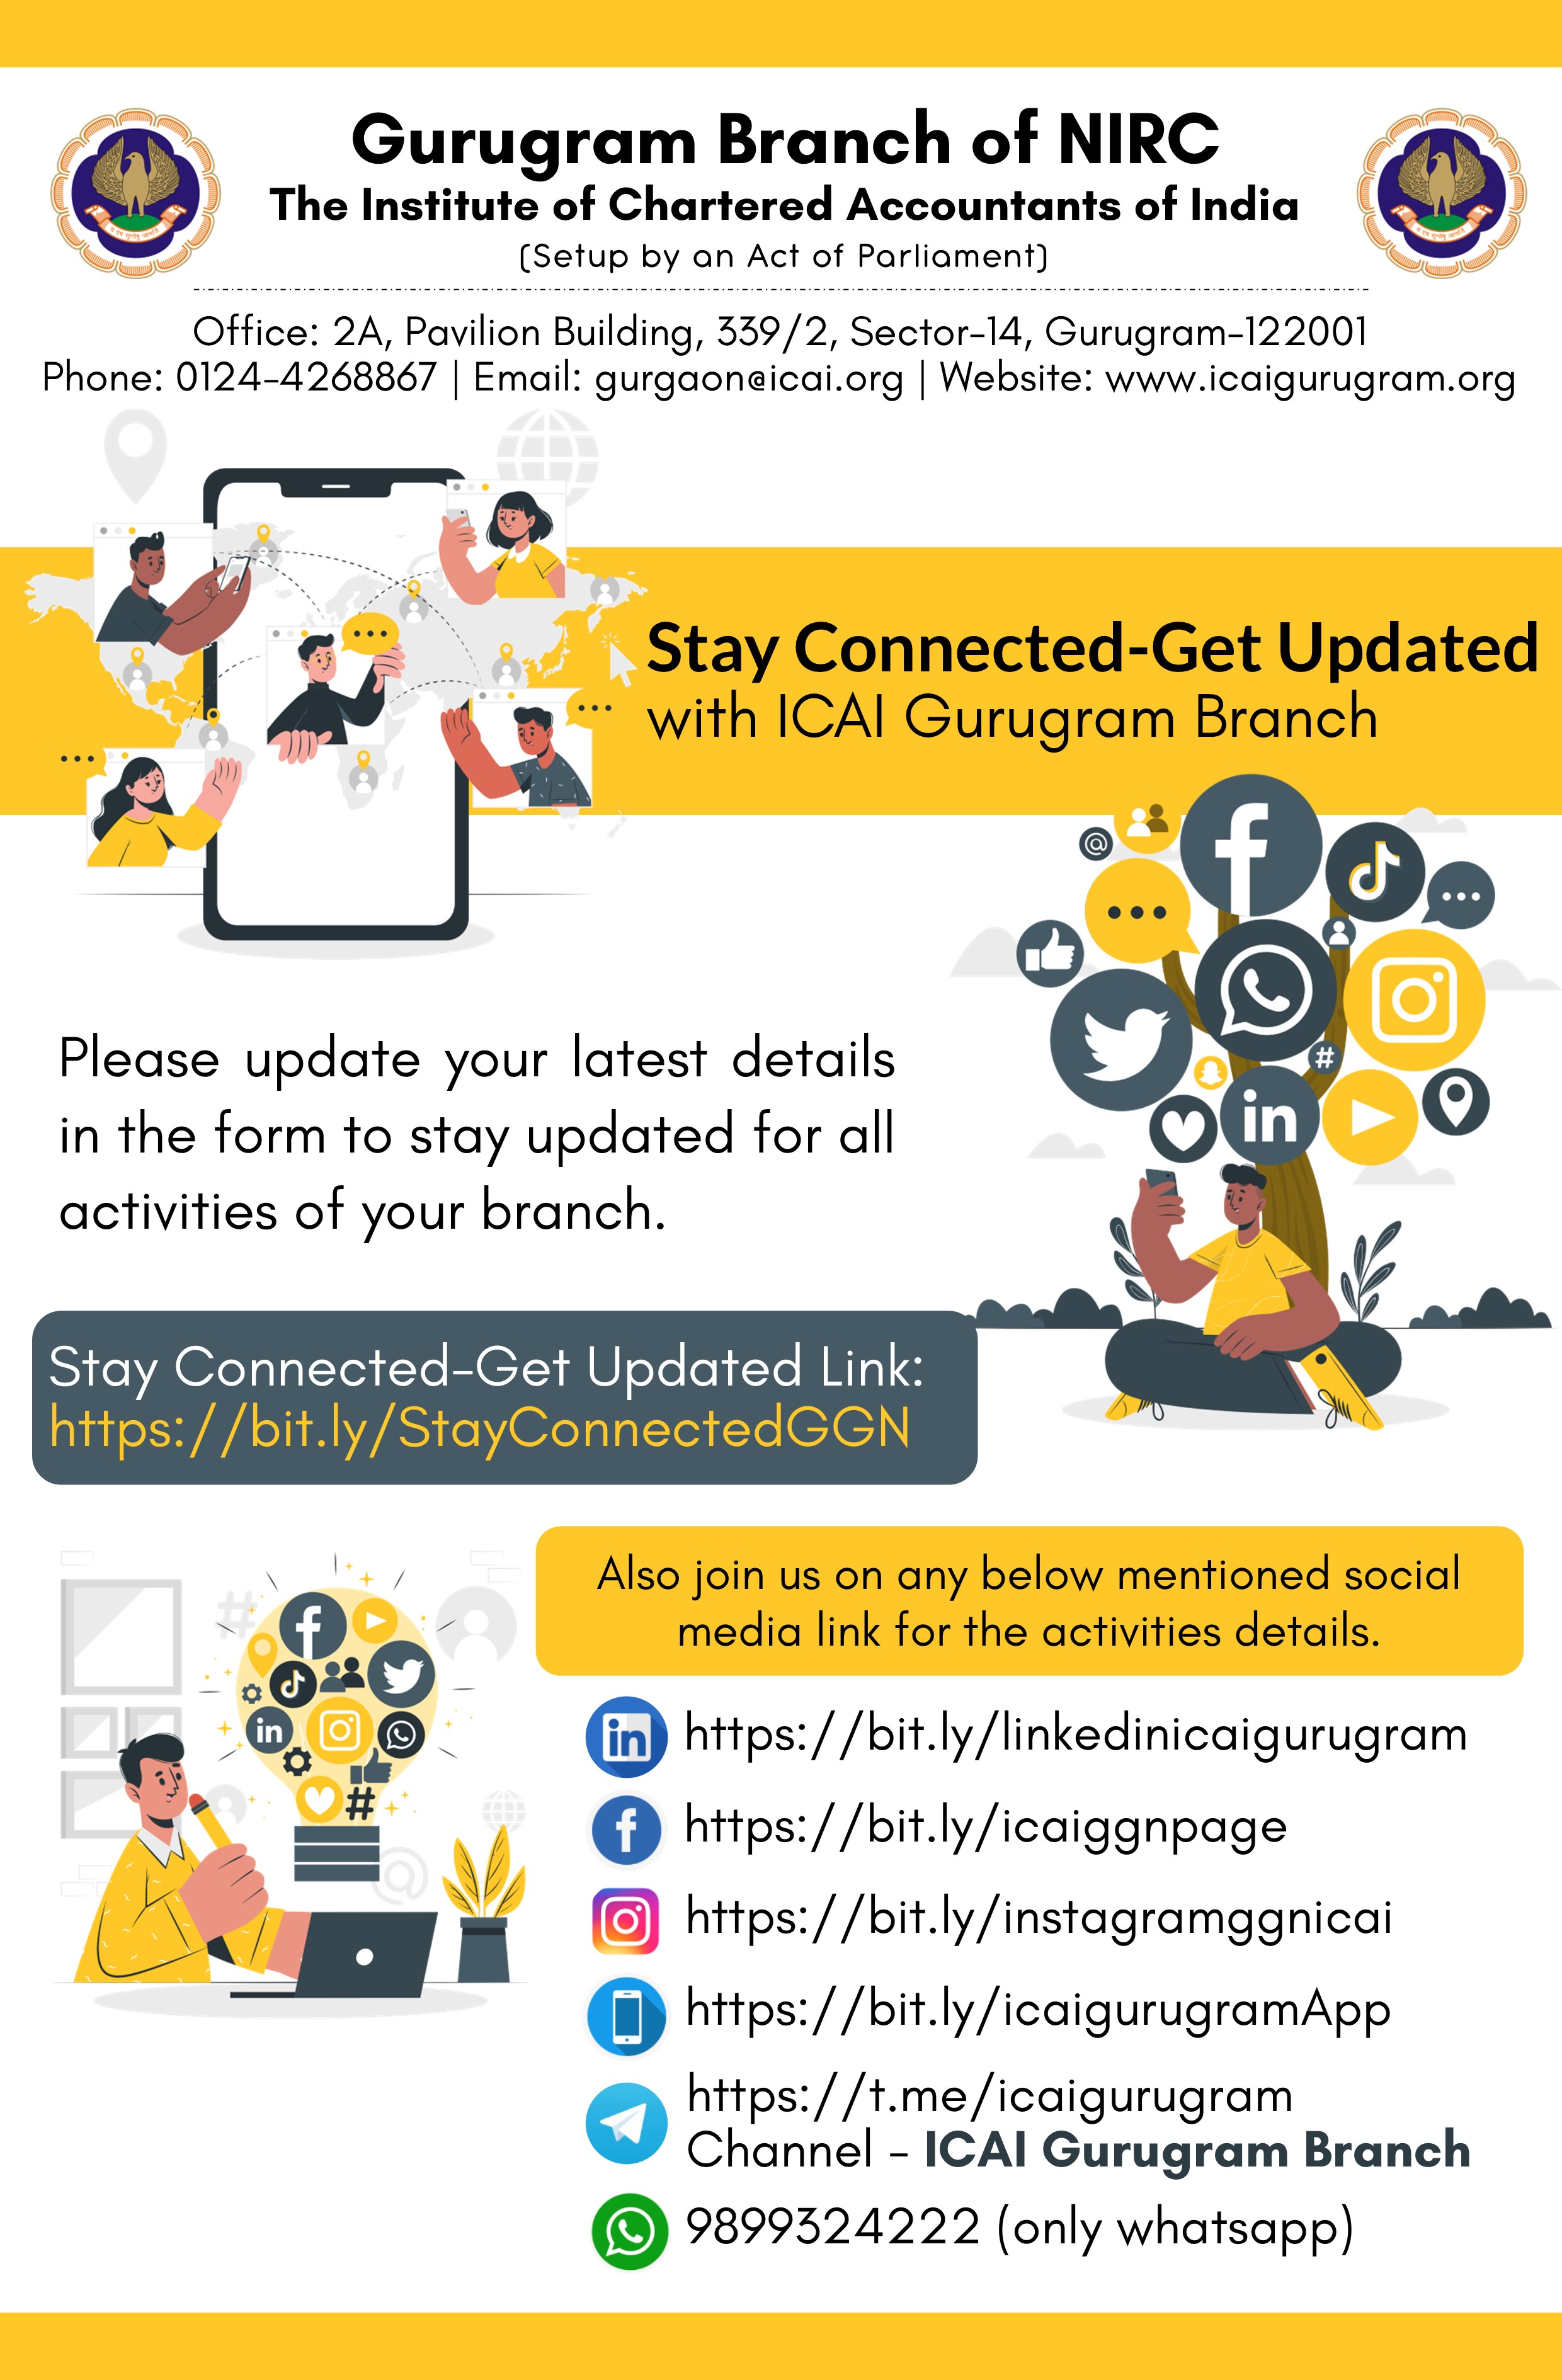 Stay Connected-Get Updated with ICAI Gurugram Branch